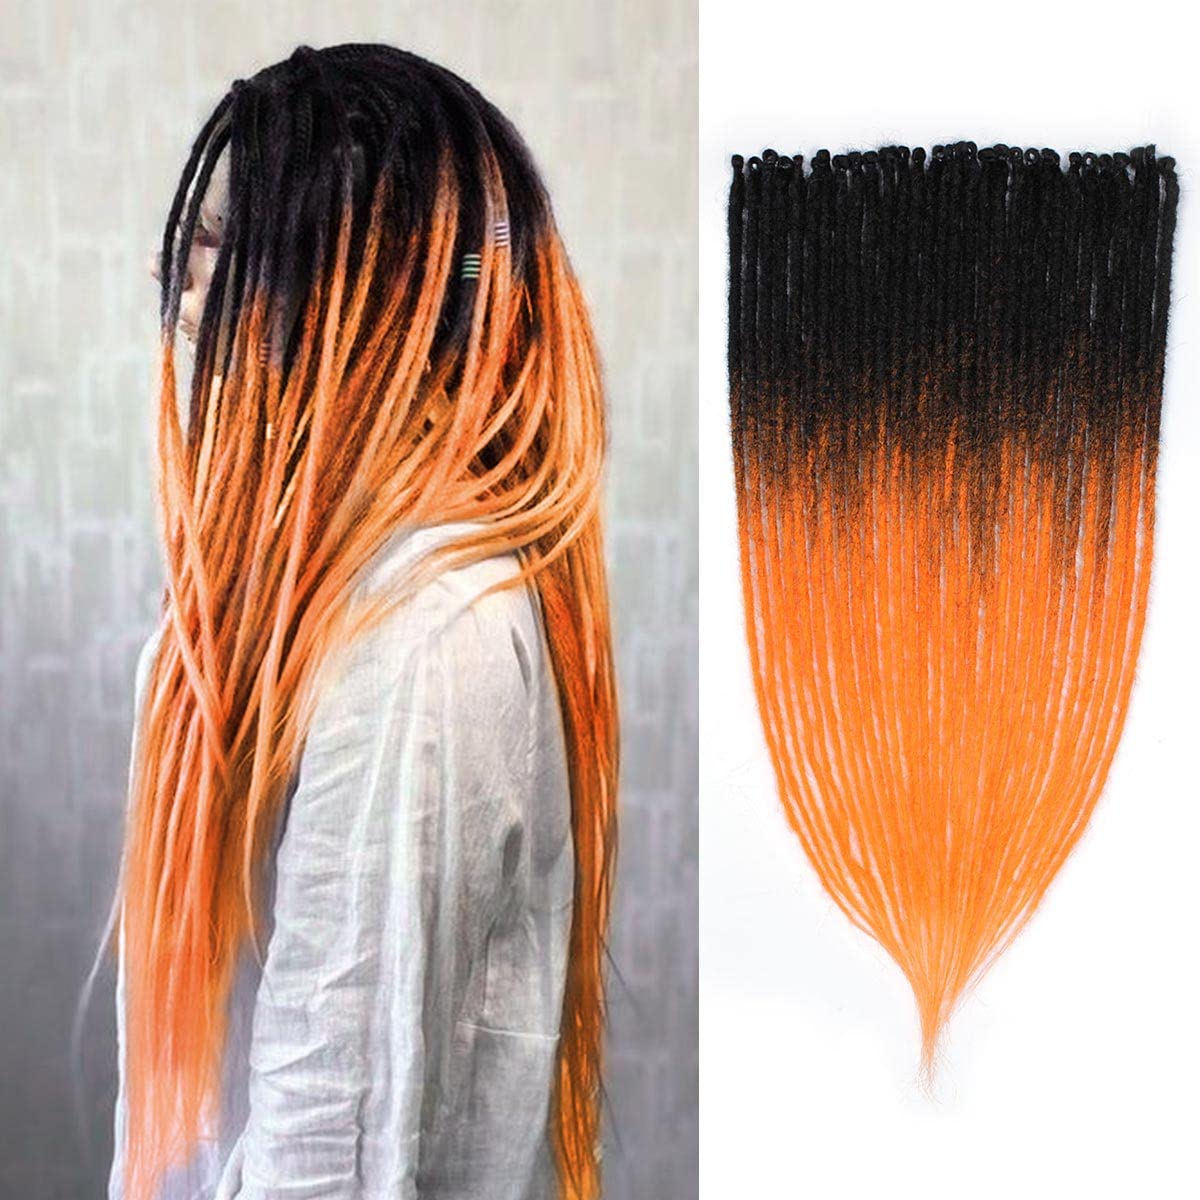 SE 24" Thin 0.6cm Fake Dreads Synthetic Dreadlock Extensions